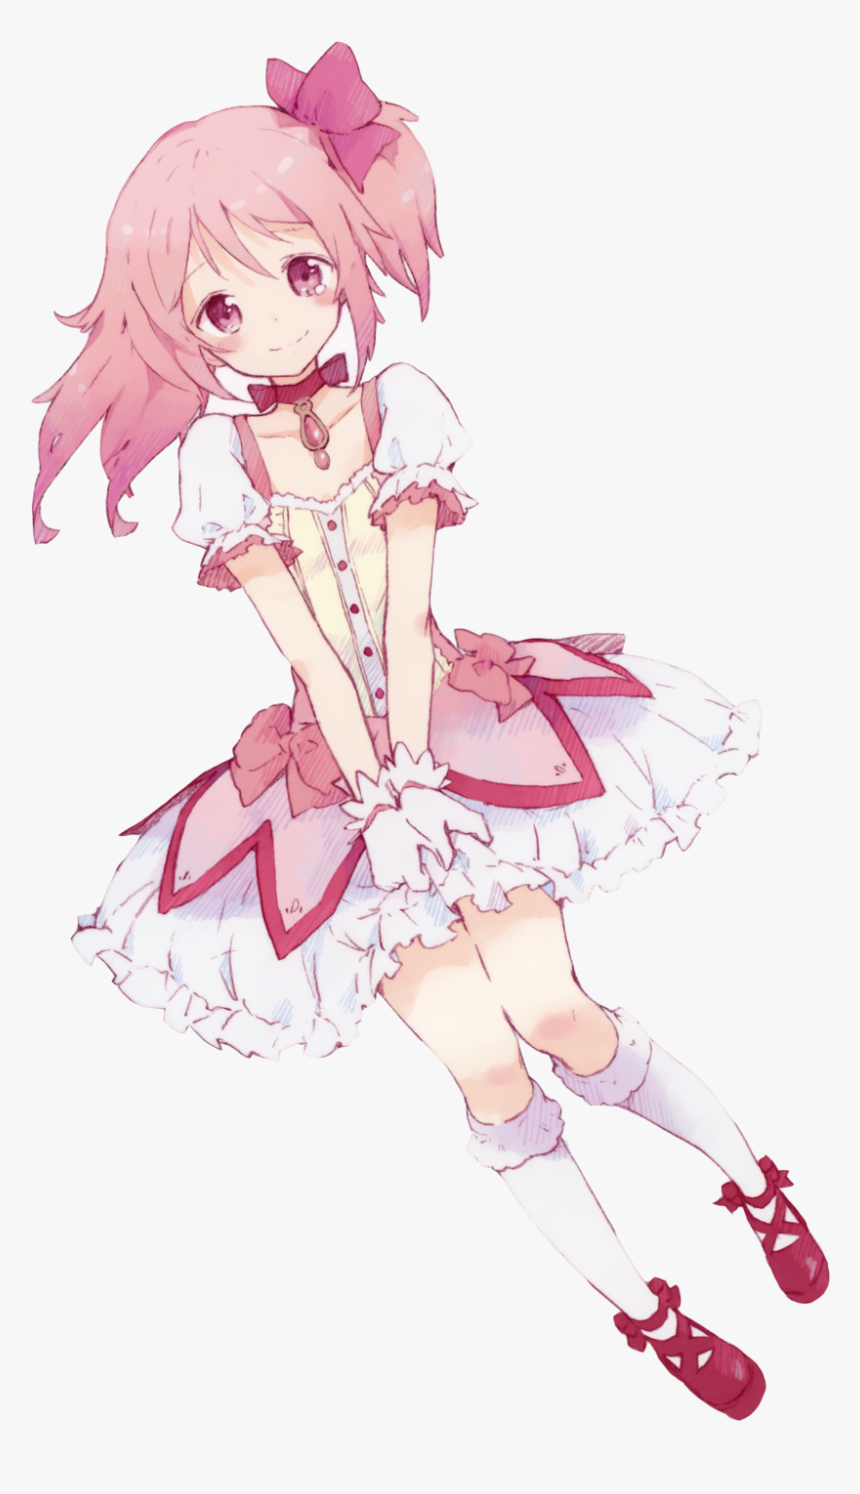 Angel Manga Girl With Pink Hair - Cute Pink Anime Girl Png, Transparent Png, Free Download